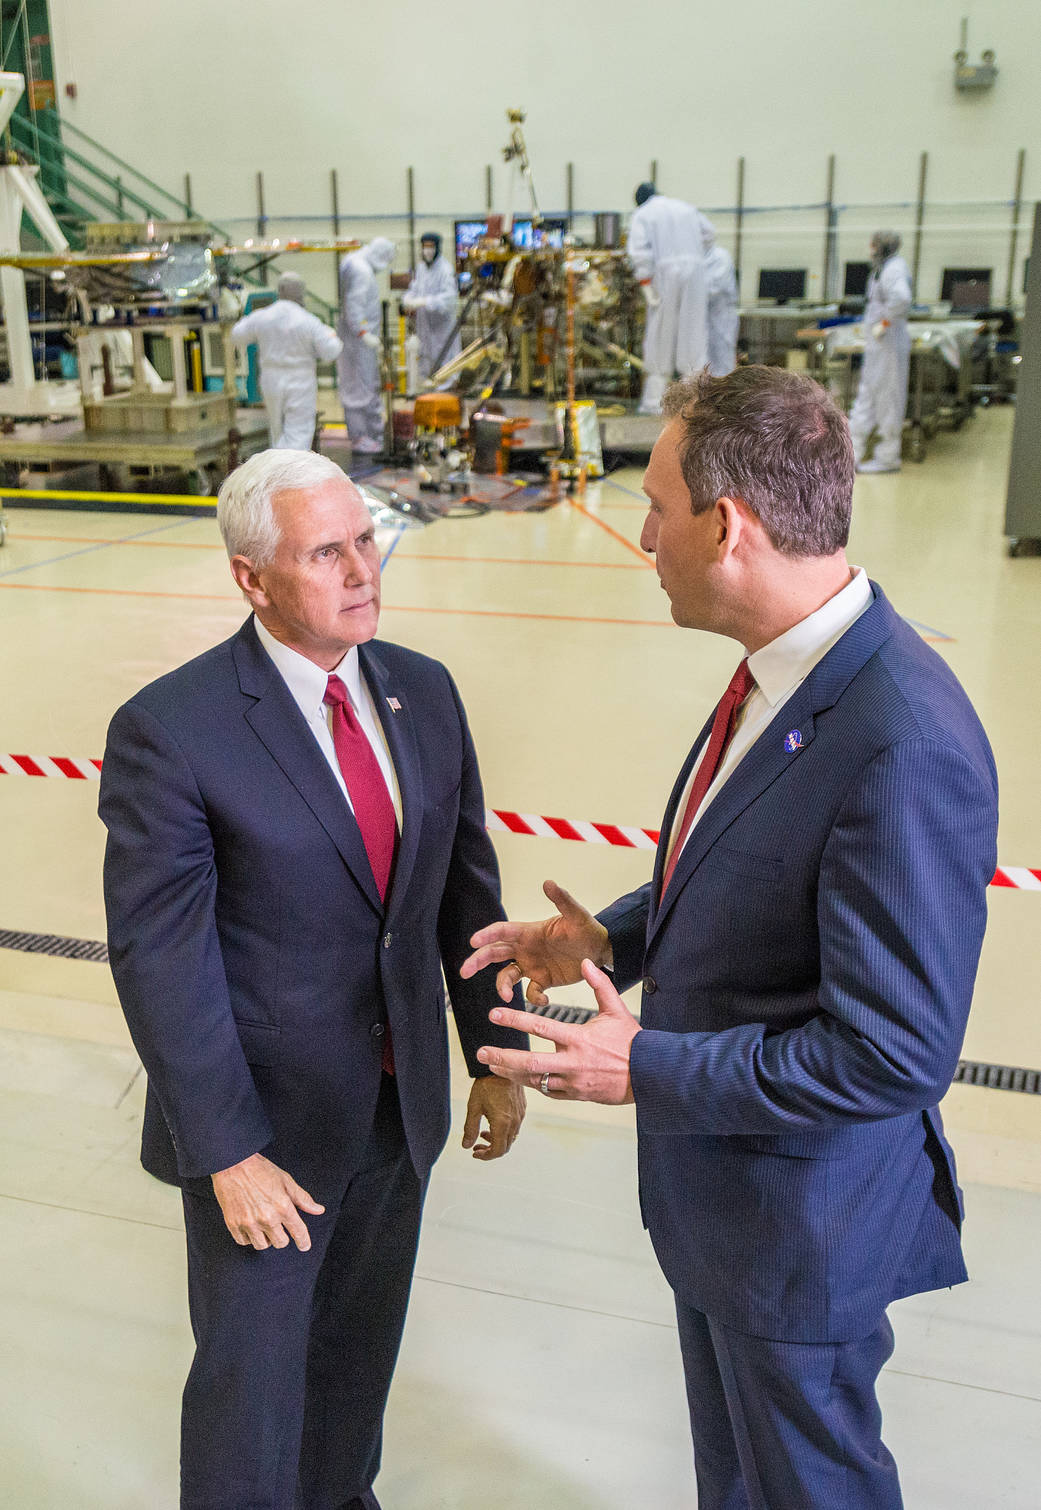 Vice President Mike Pence visits the Lockheed Martin facility